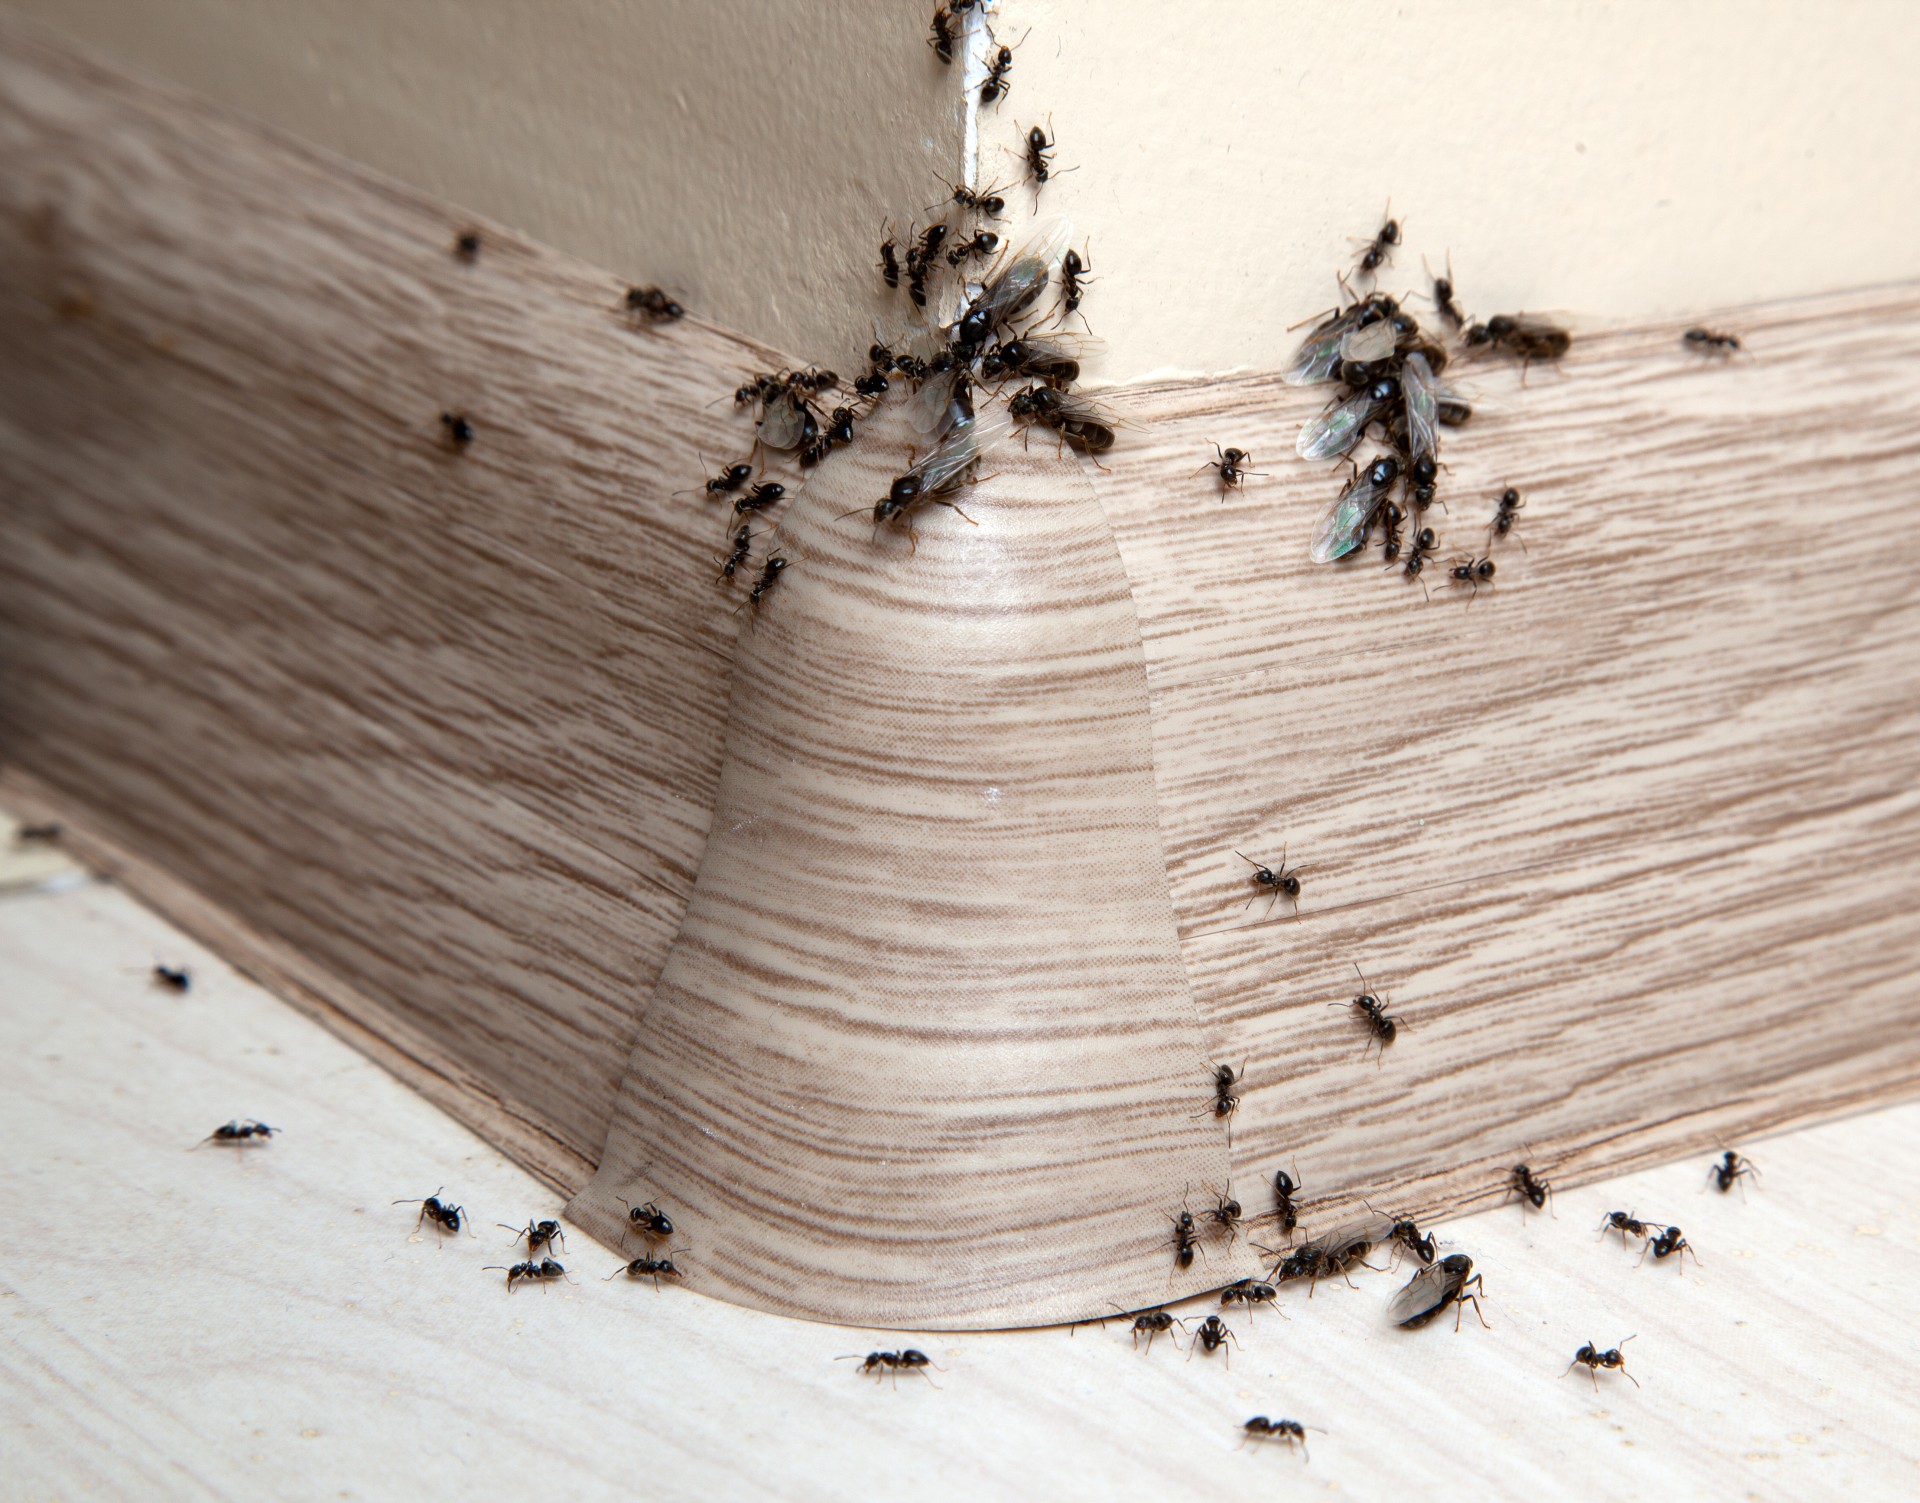 Ant Infestation, Pest Control in Walthamstow, E17. Call Now 020 8166 9746